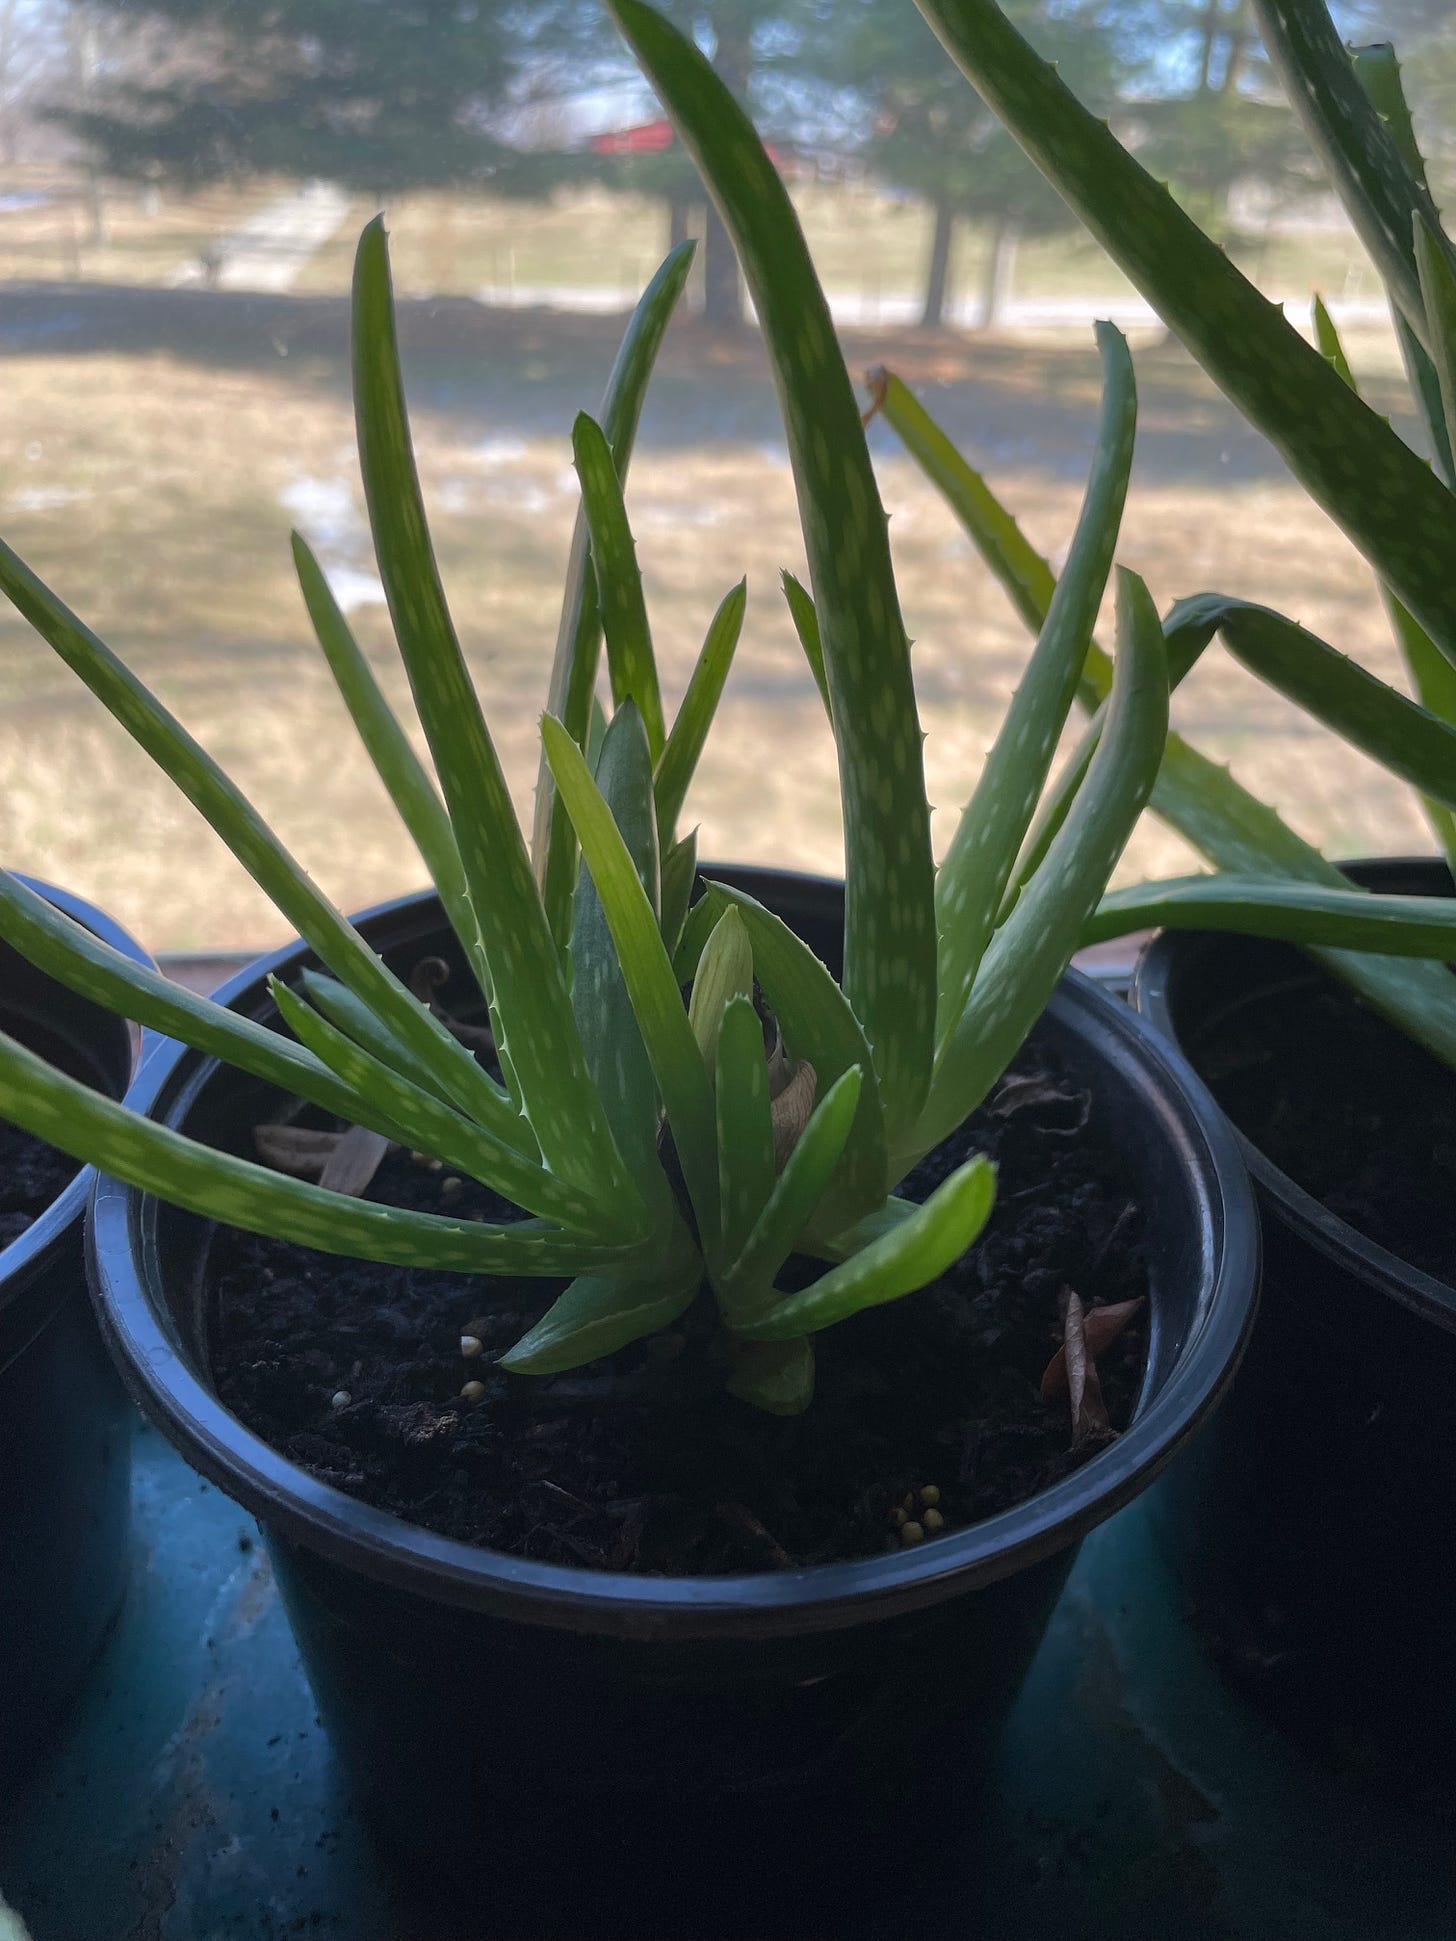 Aloe vera regrown after being chopped just above soil level.